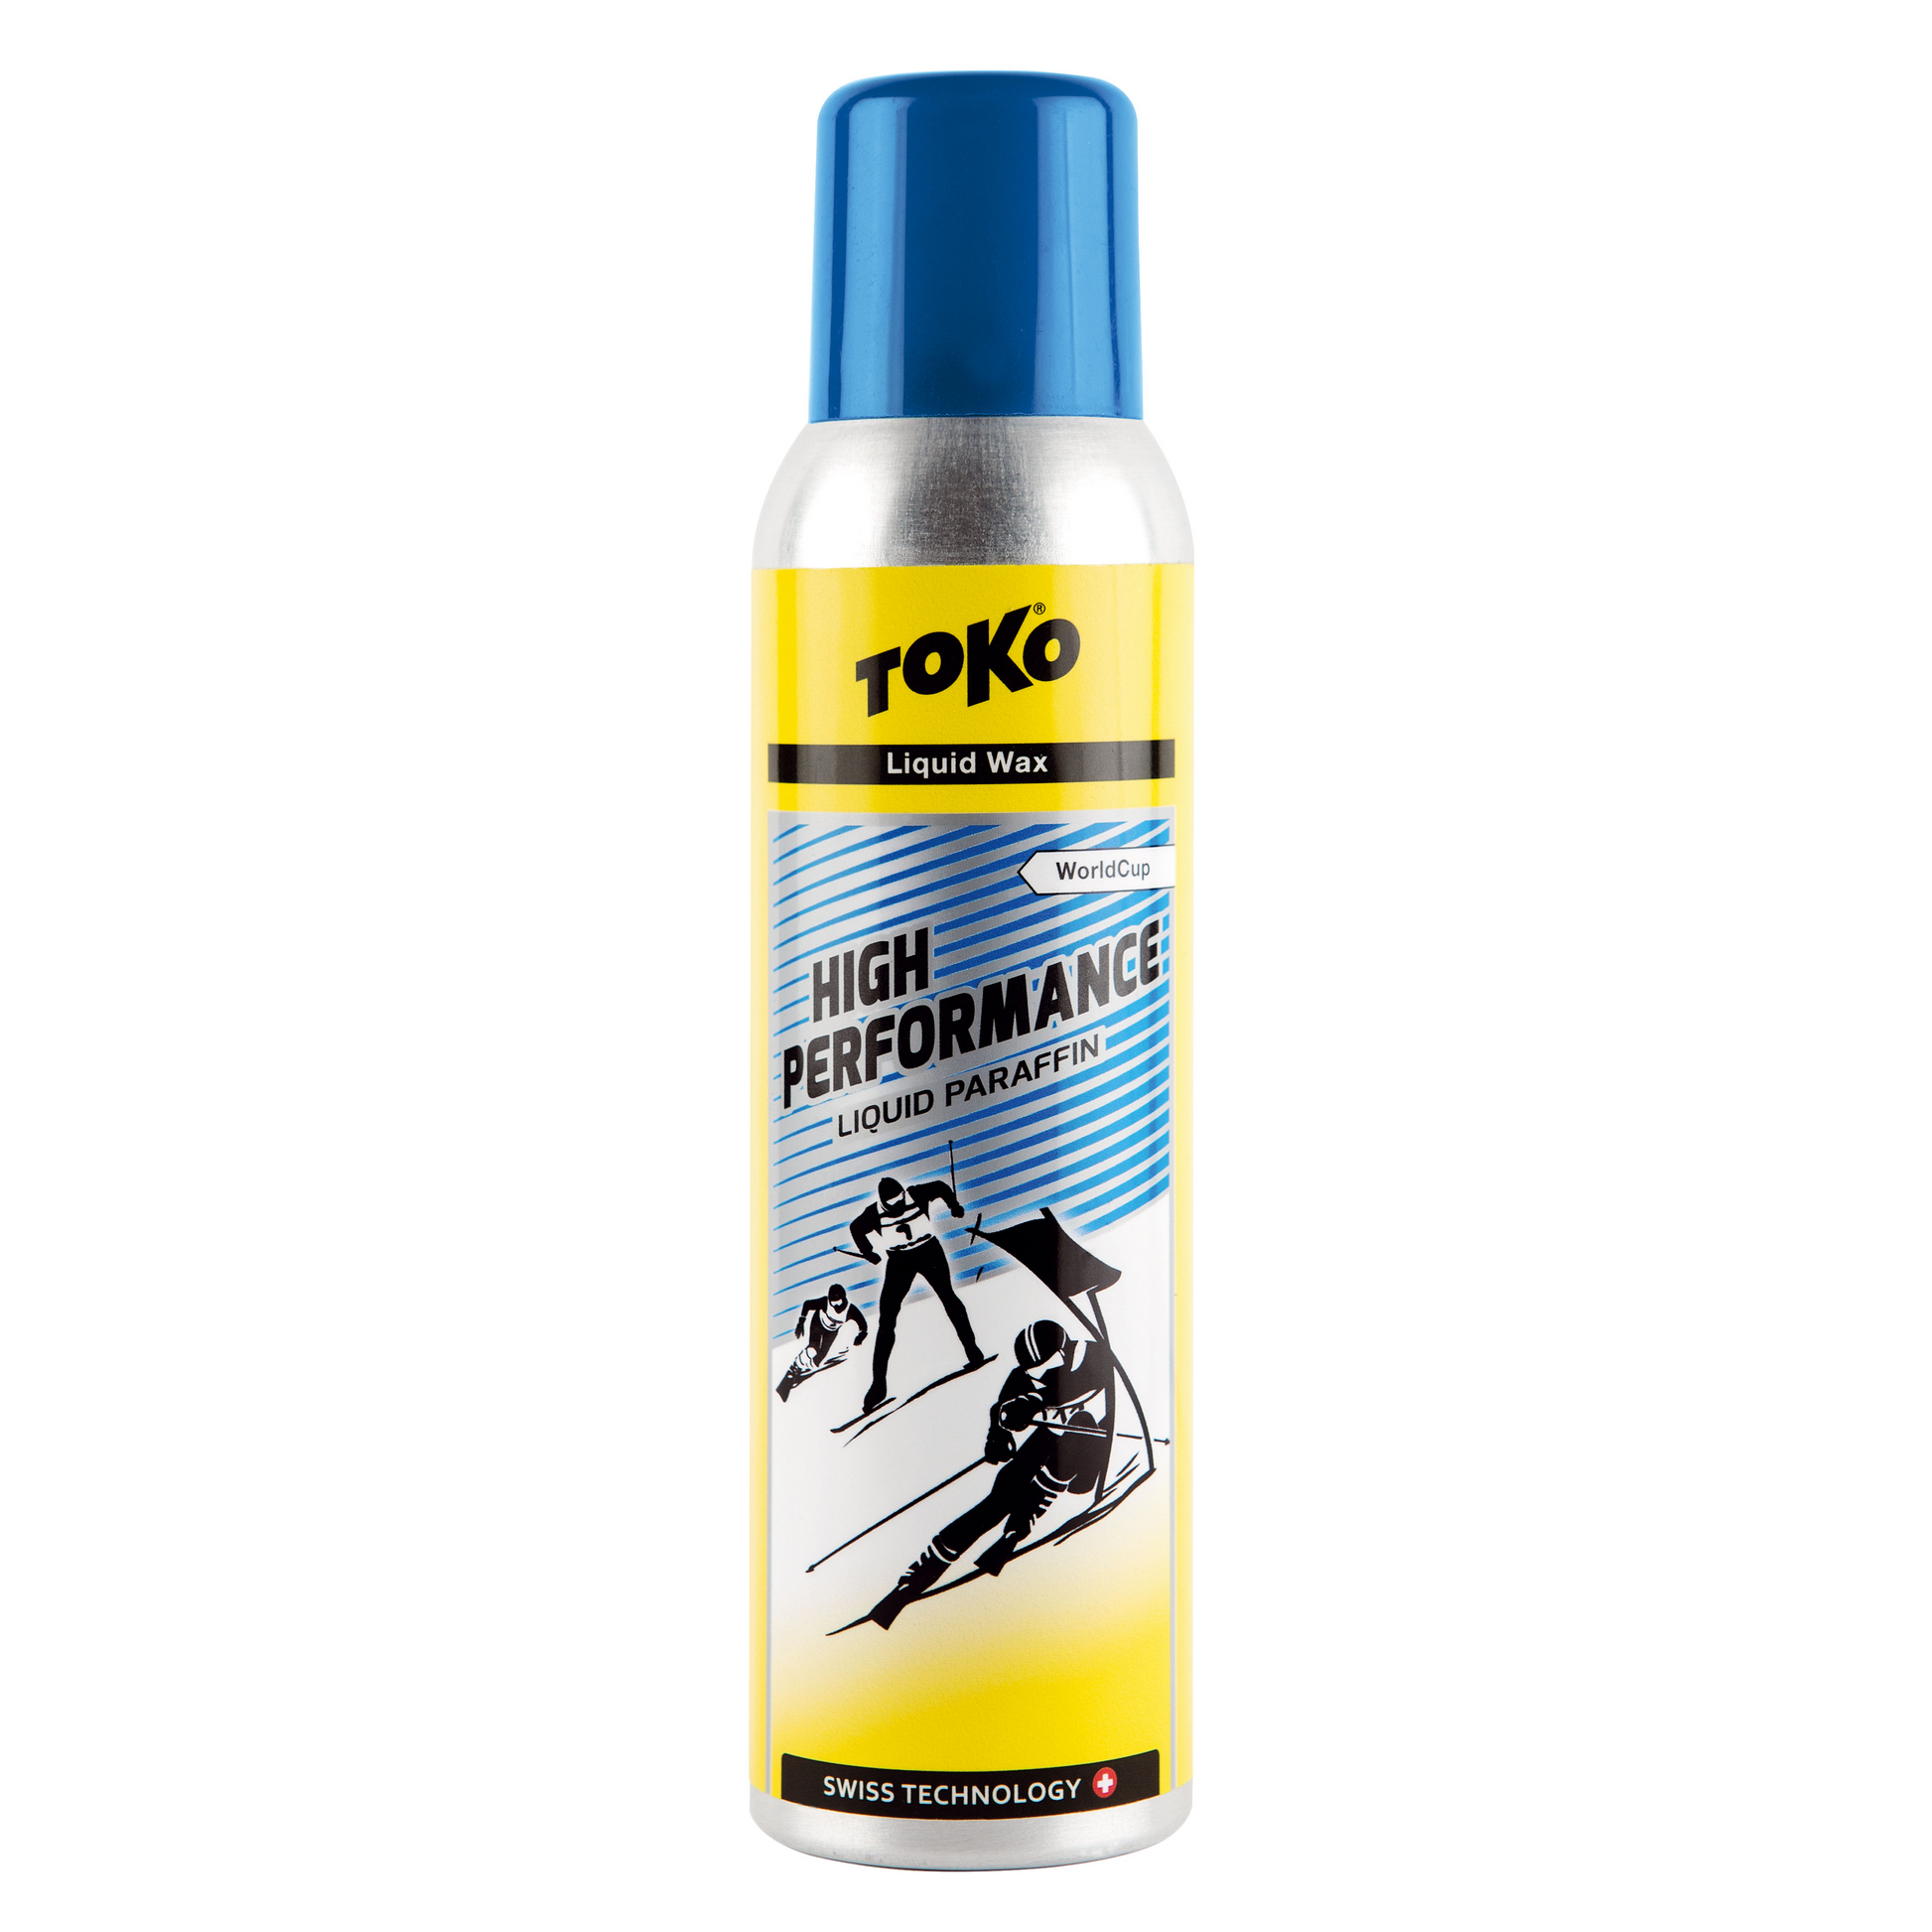 A product picture of the Toko High Performance Liquid Paraffin Blue